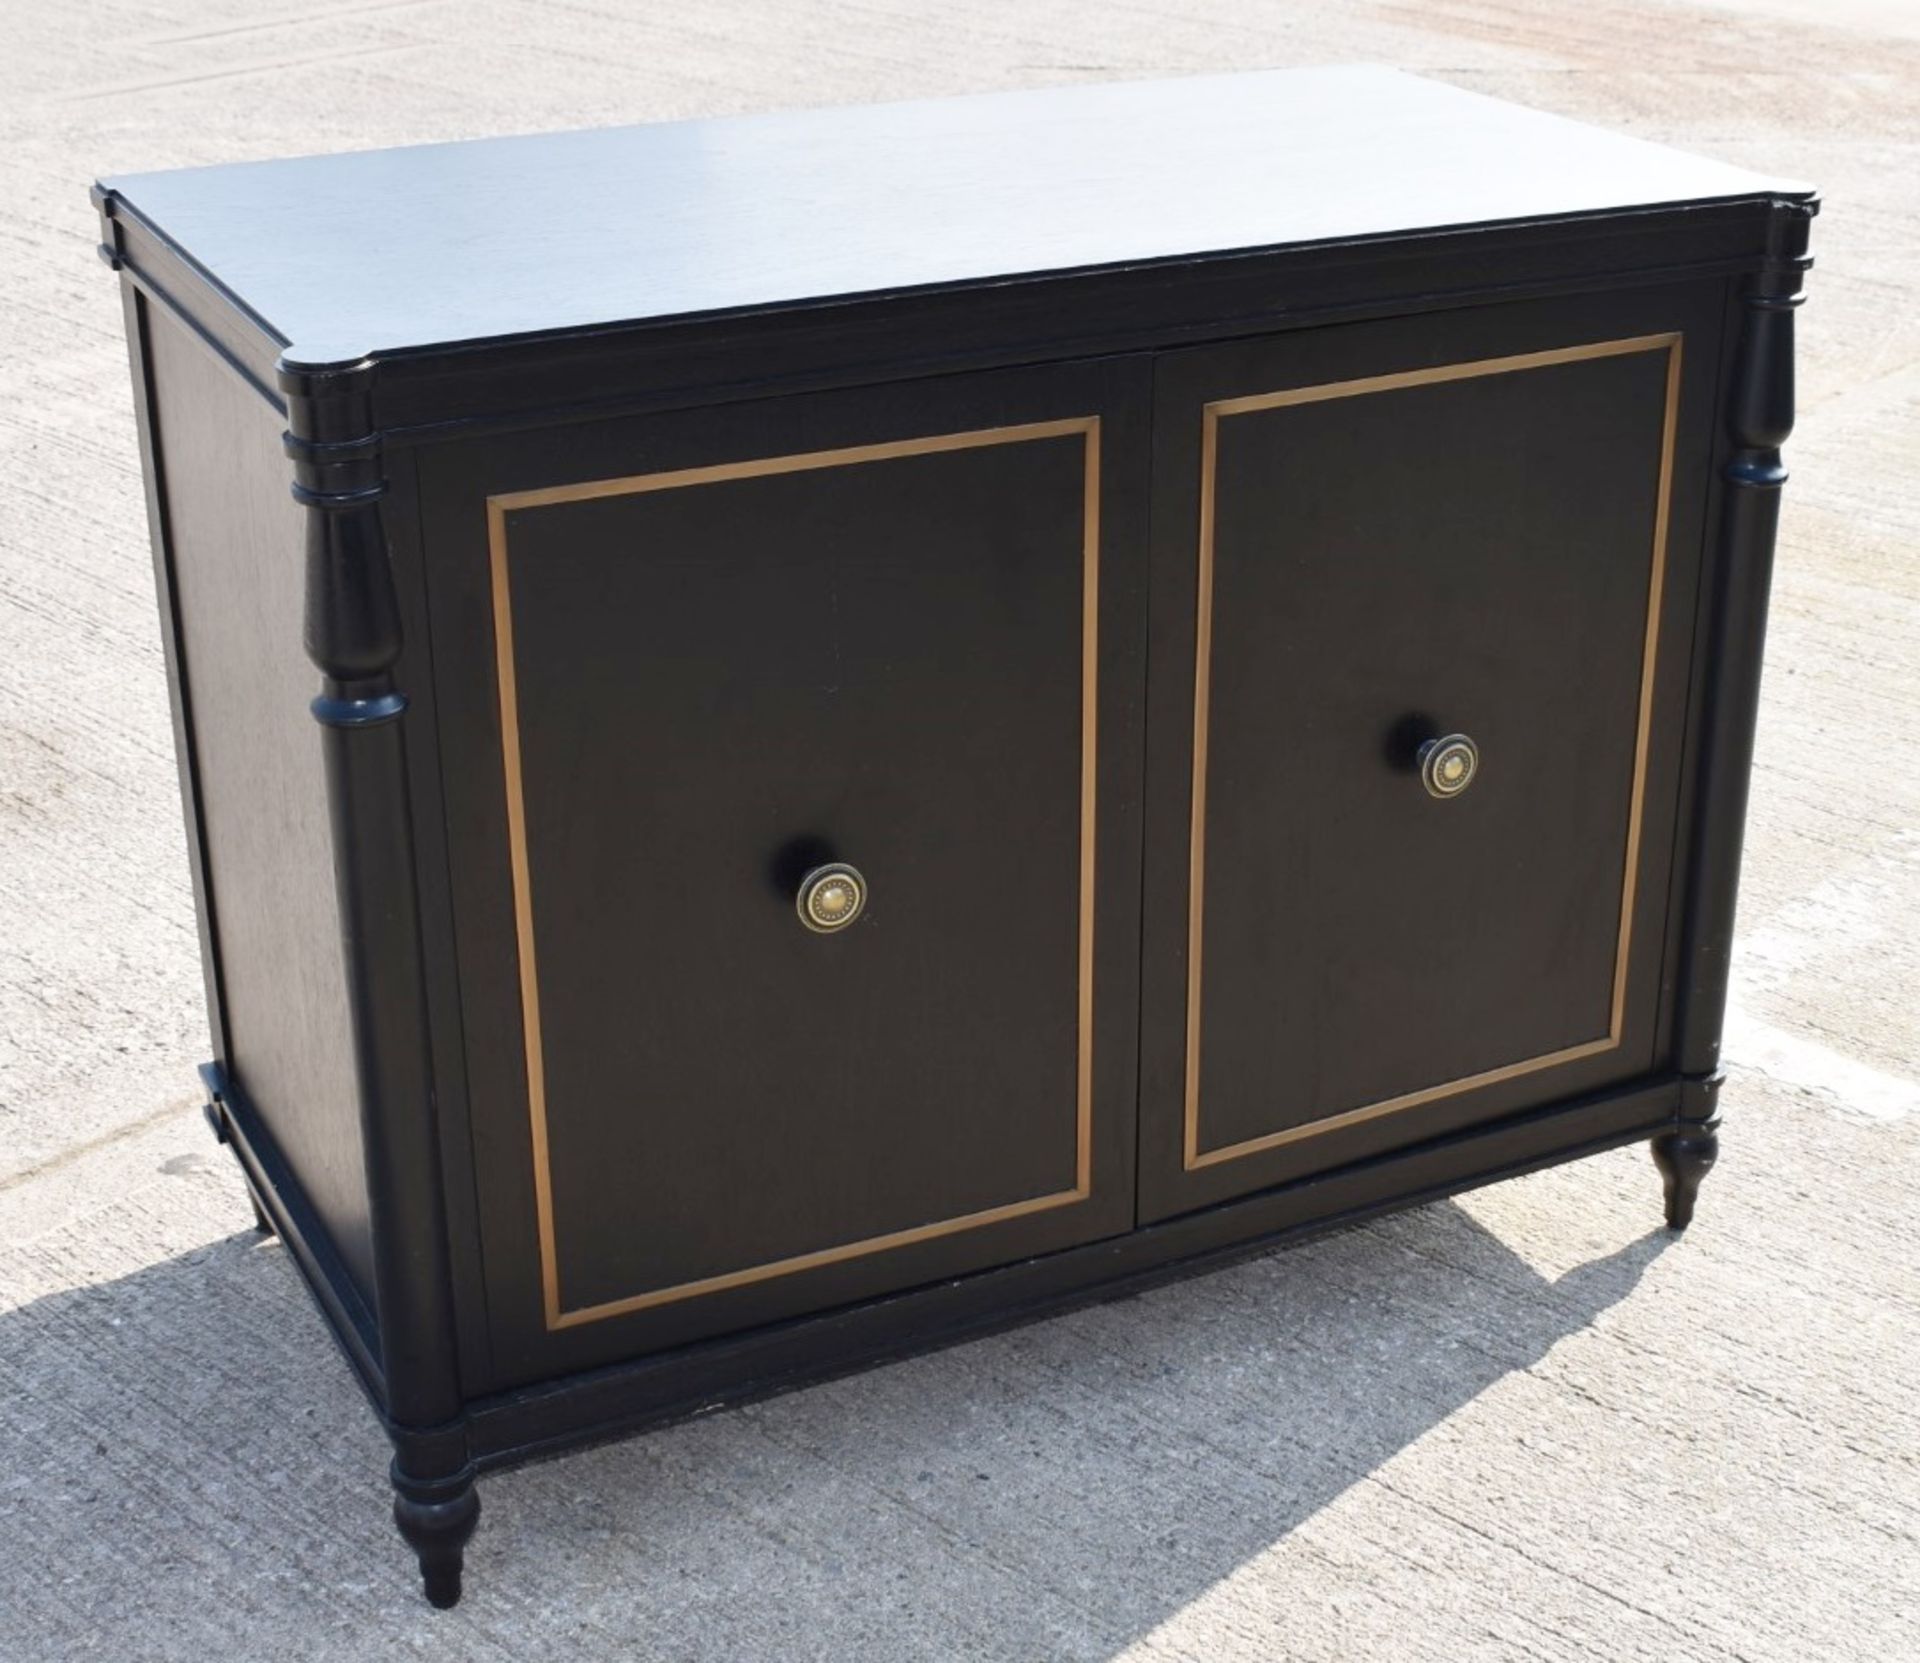 1 x Opulent 2-Door French Period-Style Handcrafted Solid Wood Cabinet in Black, with Brass Inlaid - Image 3 of 8